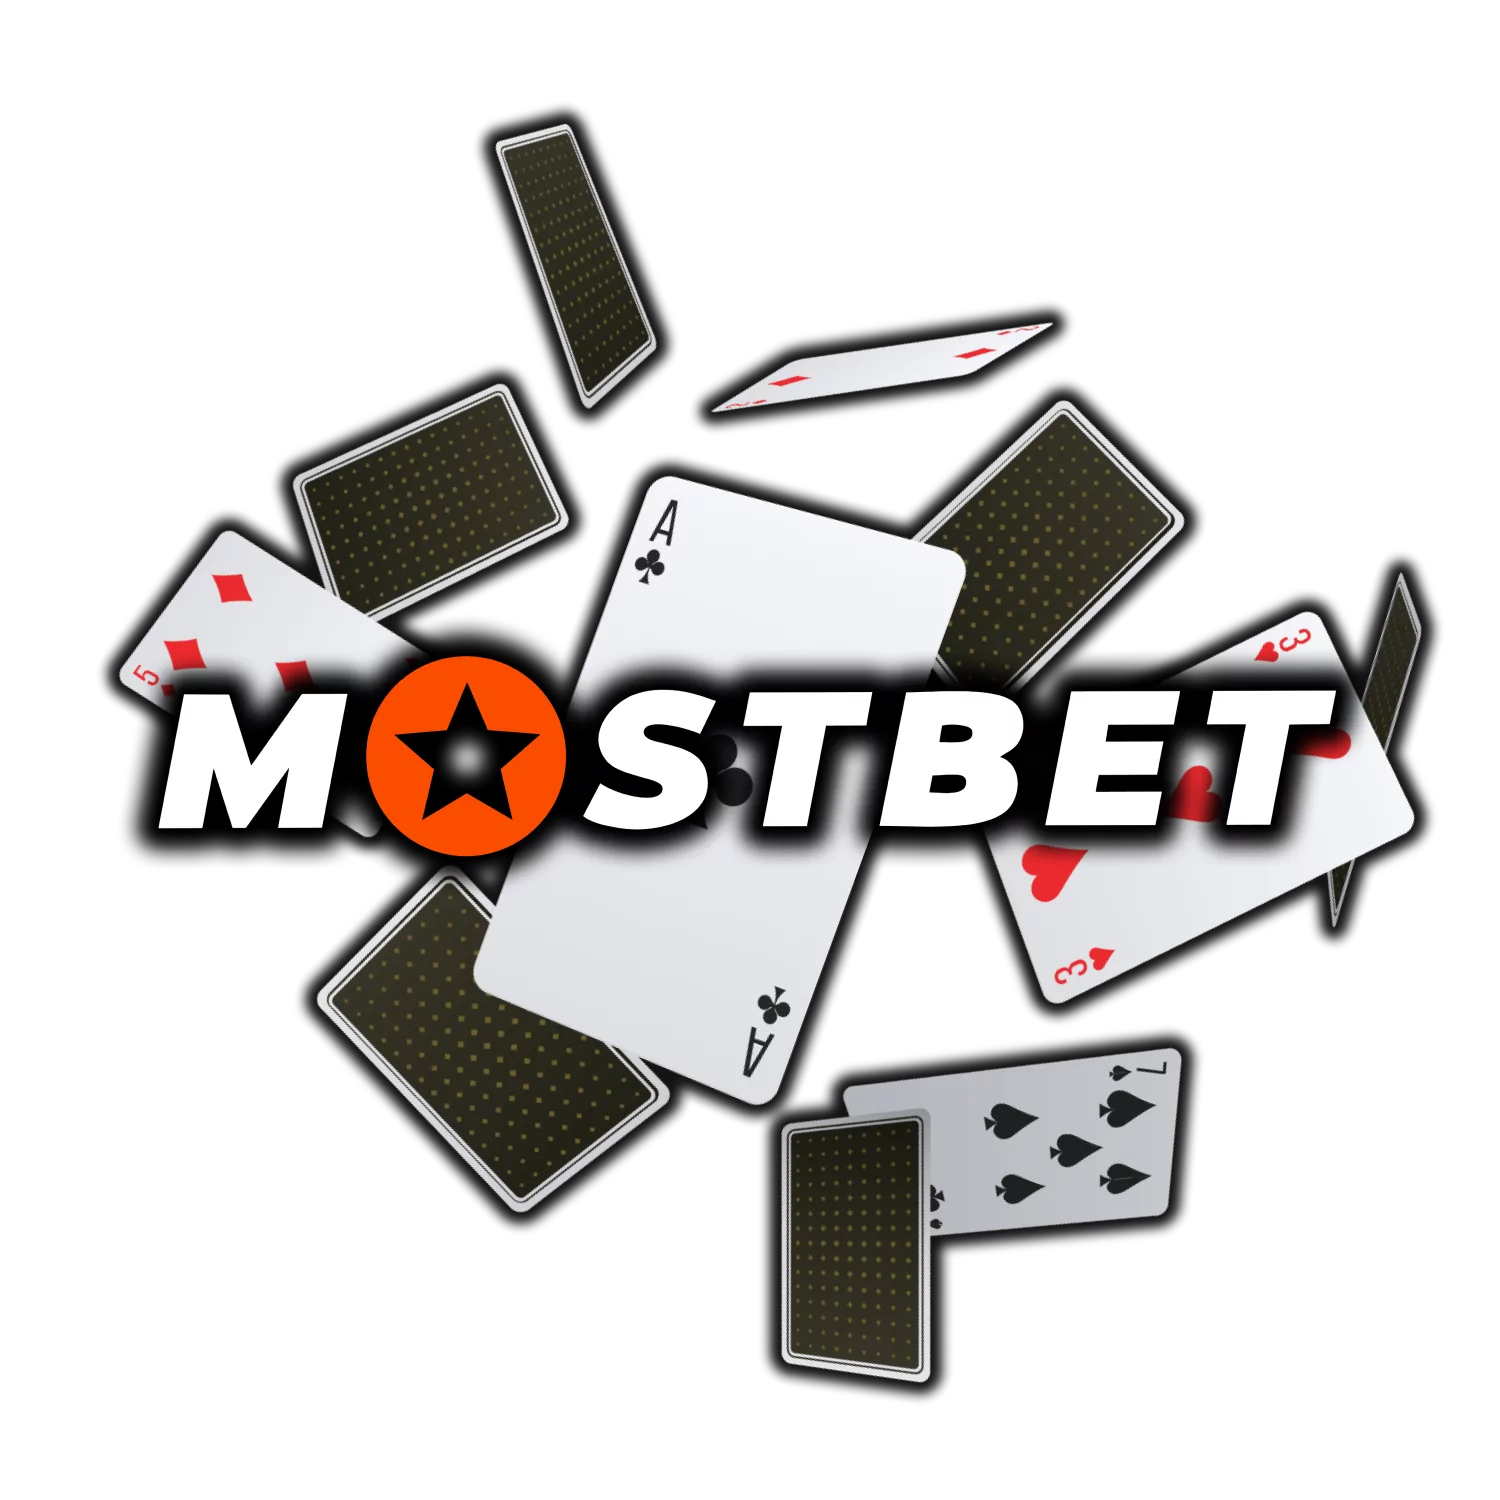 Play different cards games in the casino at Mostbet.